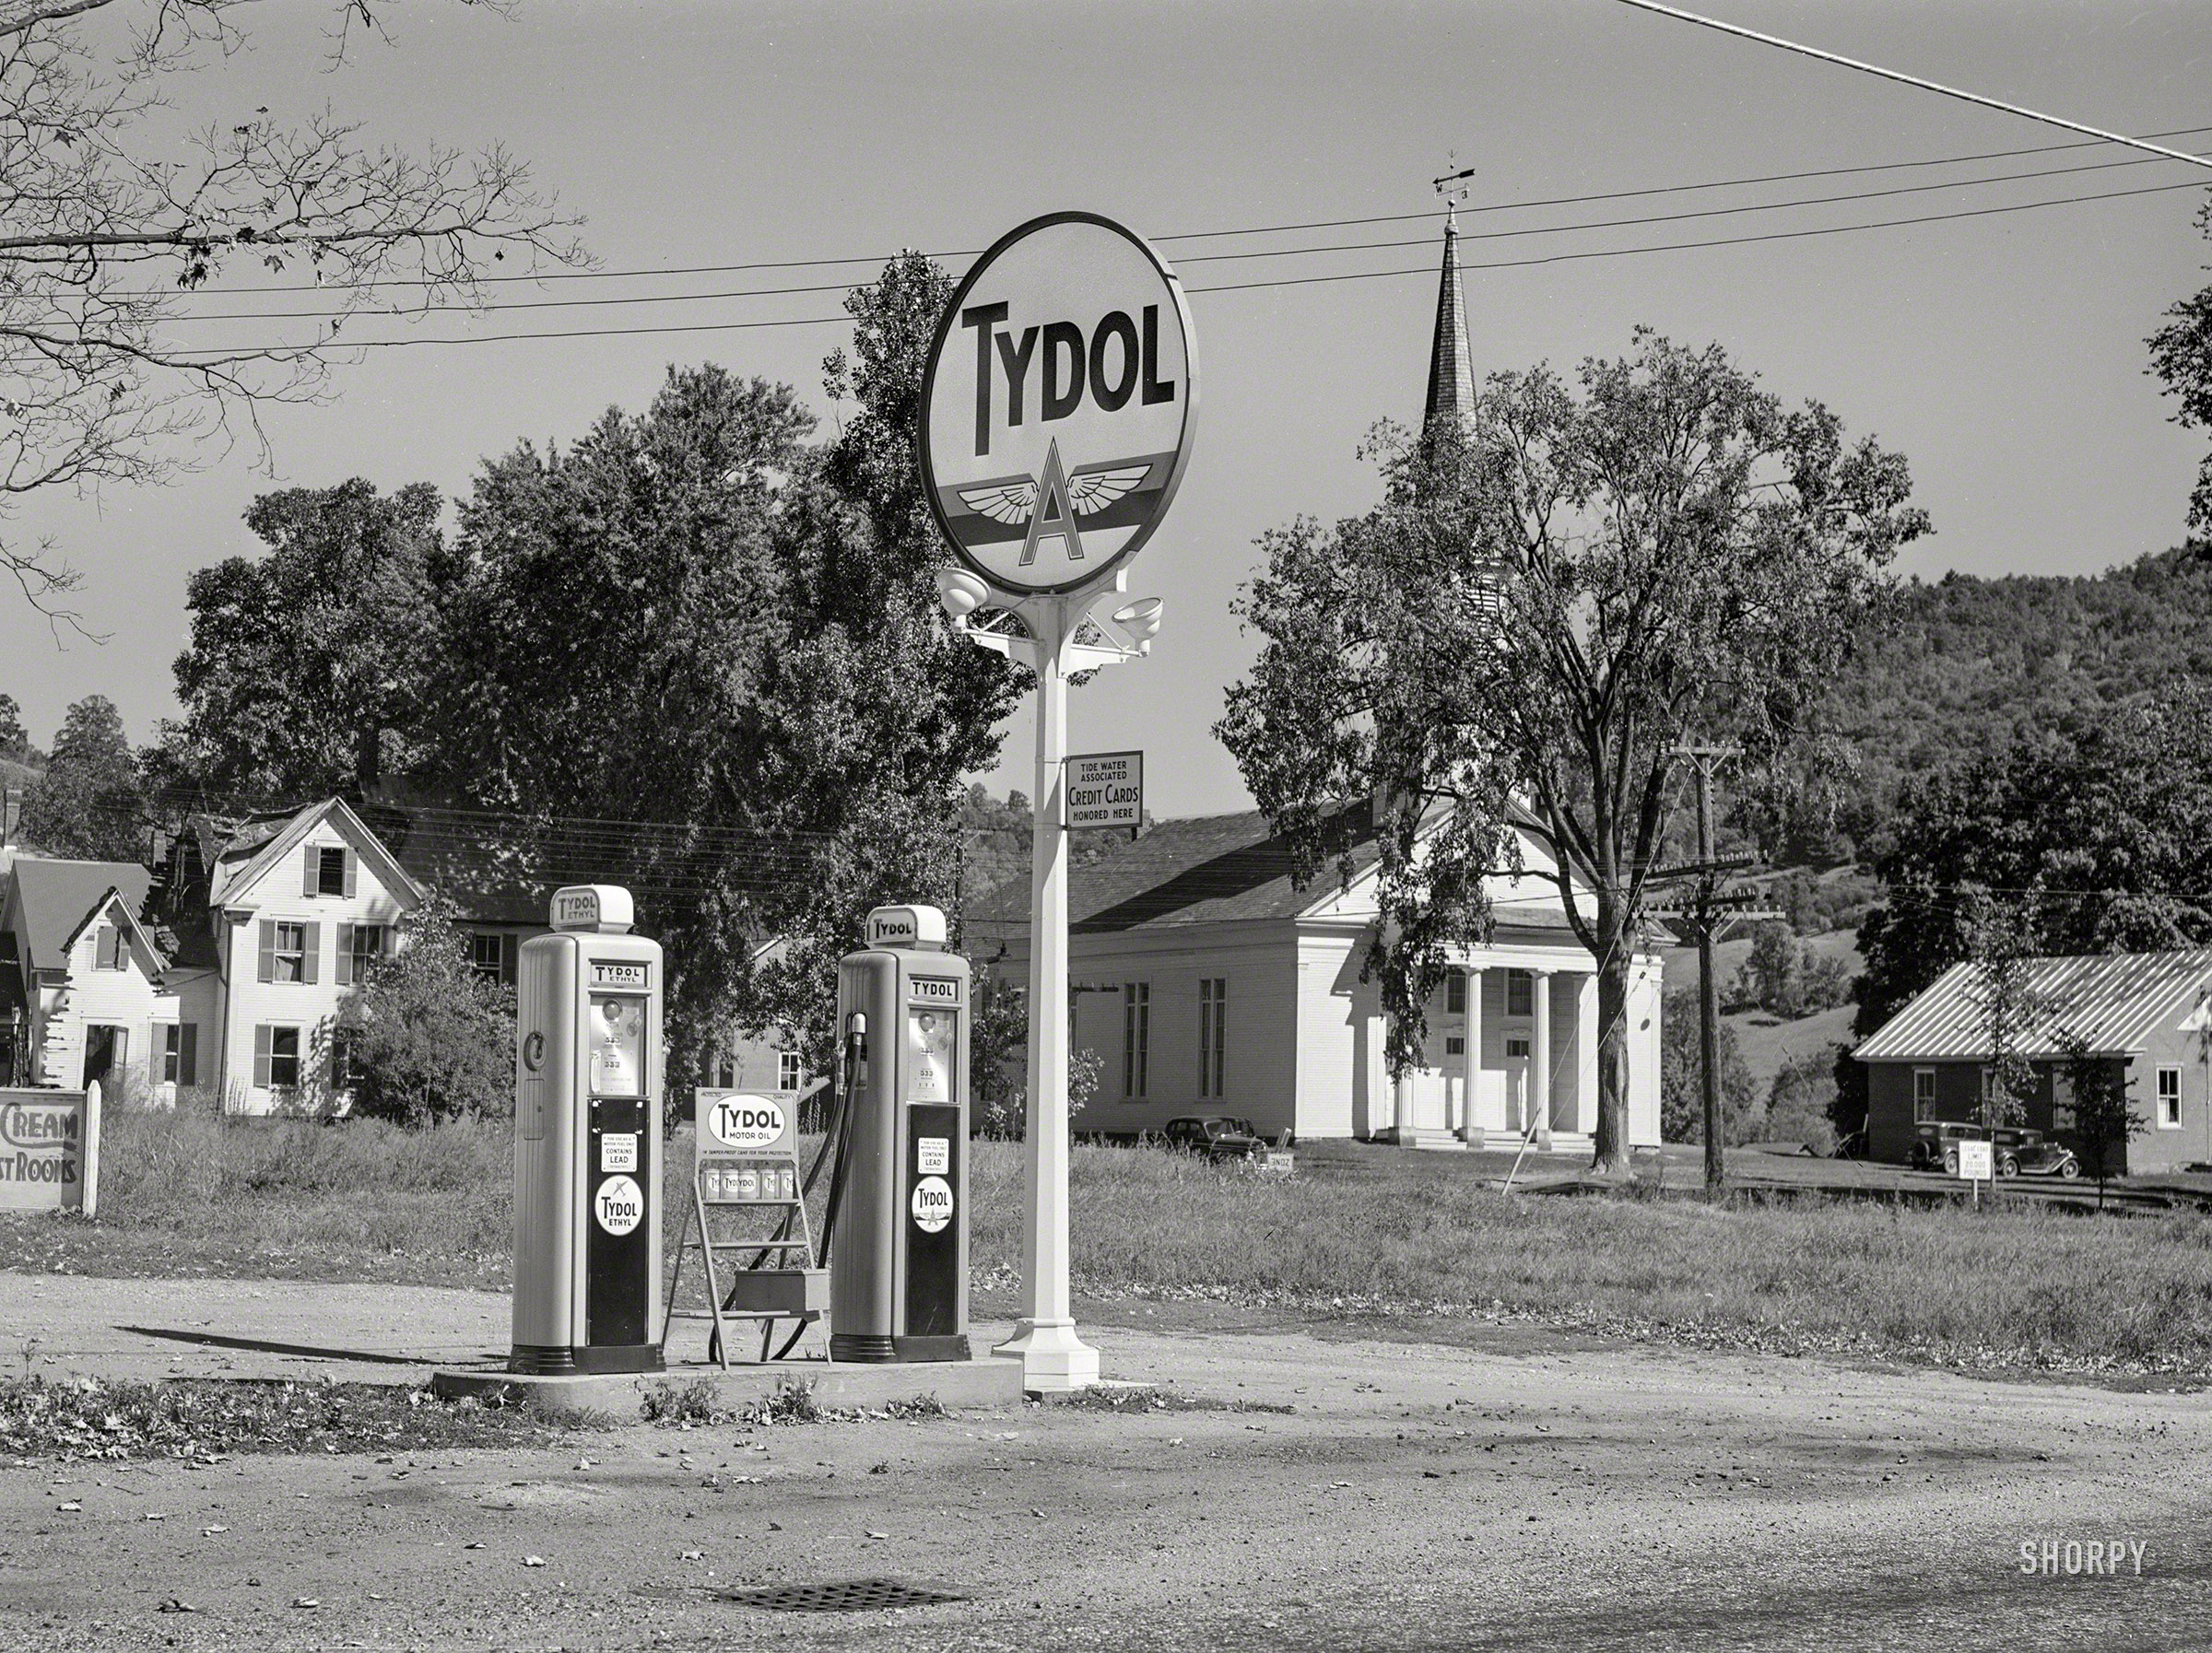 &nbsp; &nbsp; &nbsp; &nbsp; UPDATE: Our location, as pinpointed by commenter Silliaek, is Route 14 in Sharon, Vermont.
September 1941. From somewhere in Vermont comes this uncaptioned snap by Jack Delano, who was so smitten by this view of gas pumps and a church that he shot it twice. Medium format acetate negative. View full size.